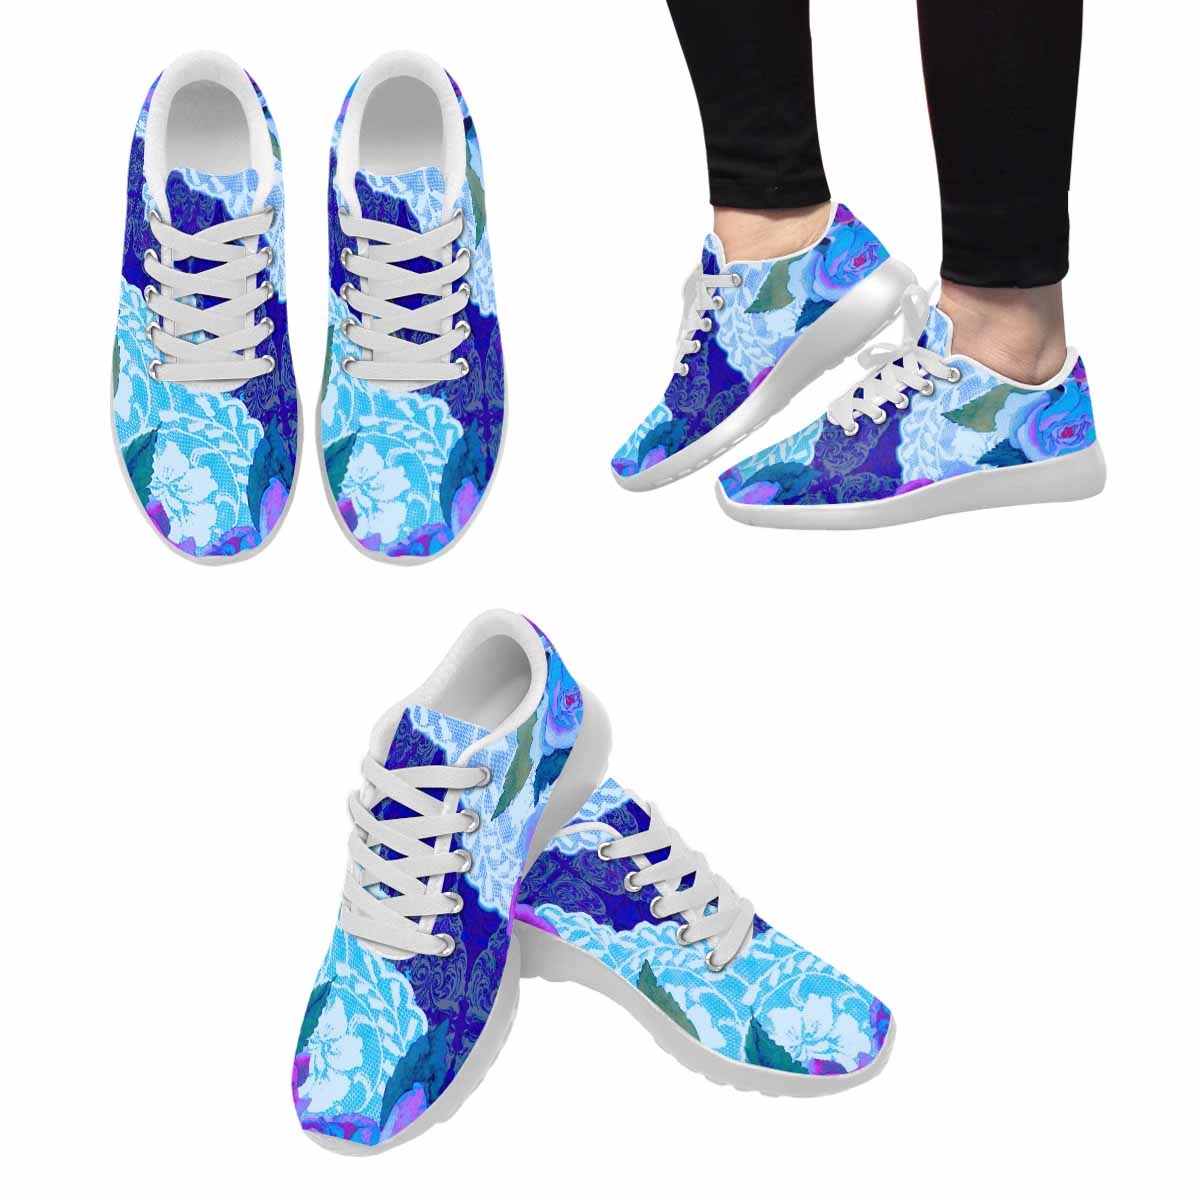 Victorian lace print, womens cute casual or running sneakers, design 20